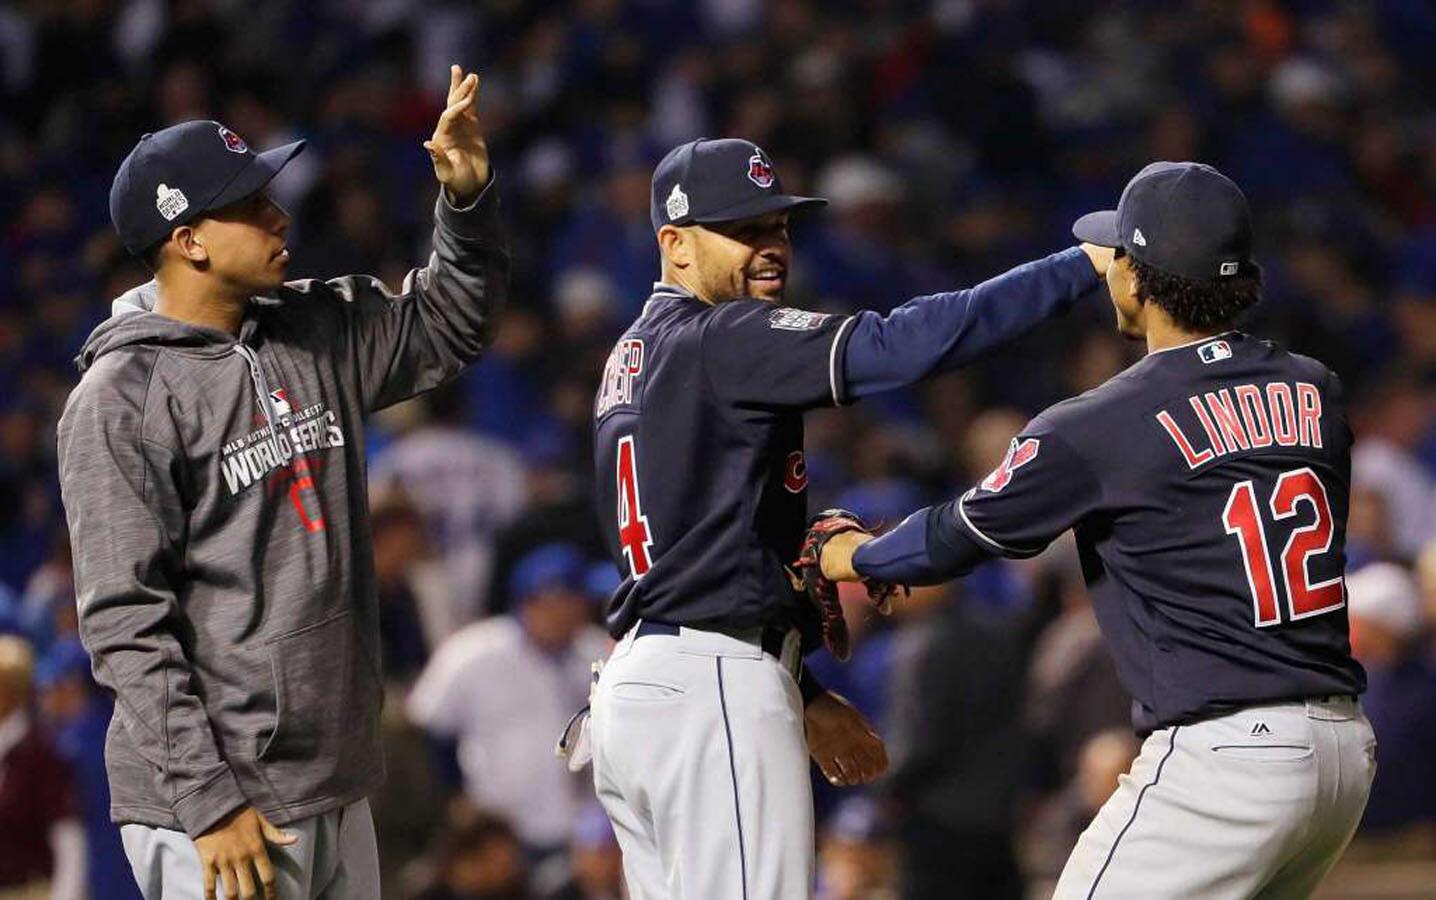 Coco Crisp #4 and Francisco Lindor #12 of the Cleveland Indians celebrate after beating the Chicago Cubs 1-0 in Game Three of the 2016 World Series at Wrigley Field on October 28, 2016 in Chicago, Illinois.